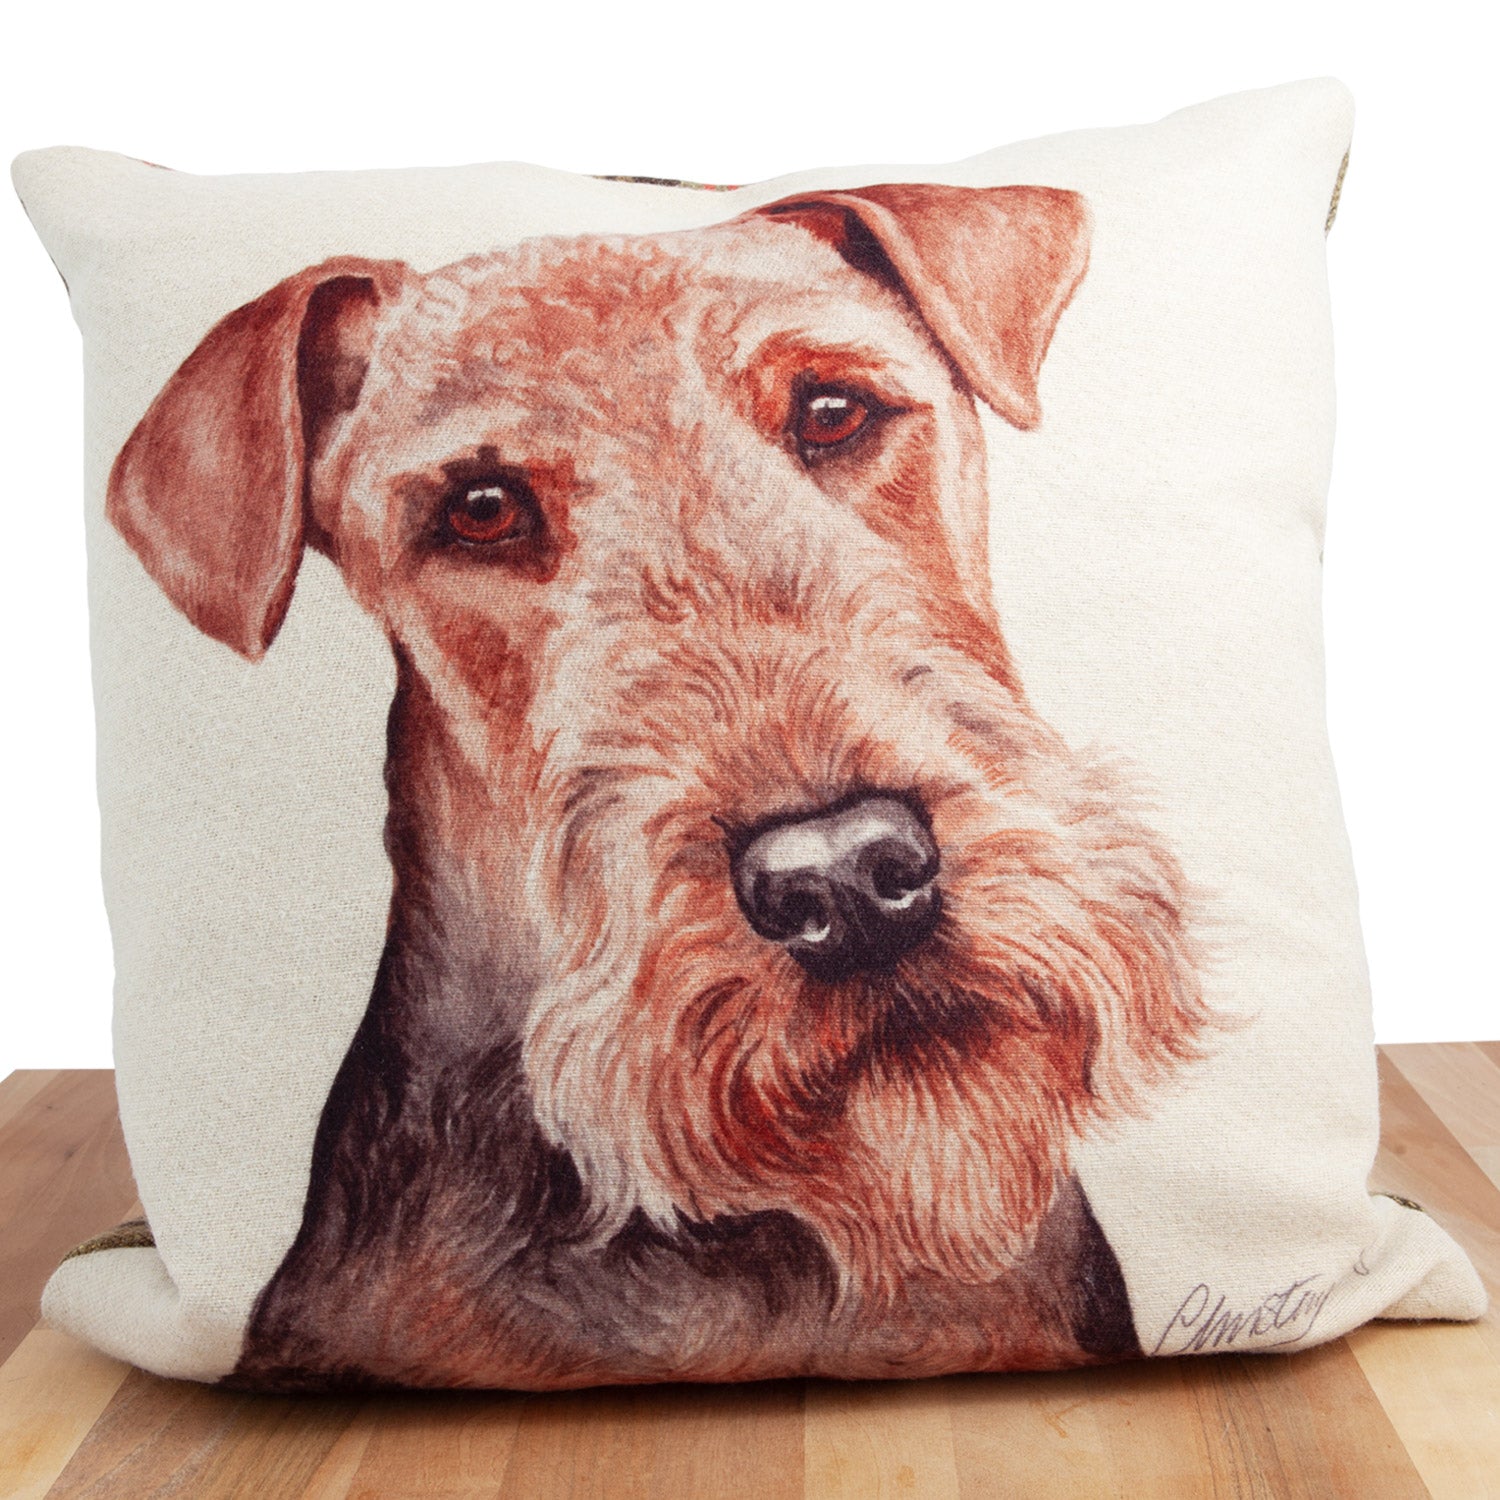 Dog Lover Gifts available at Dog Krazy Gifts. Airedale Cushion, part of our Christine Varley collection – available at www.dogkrazygifts.co.uk